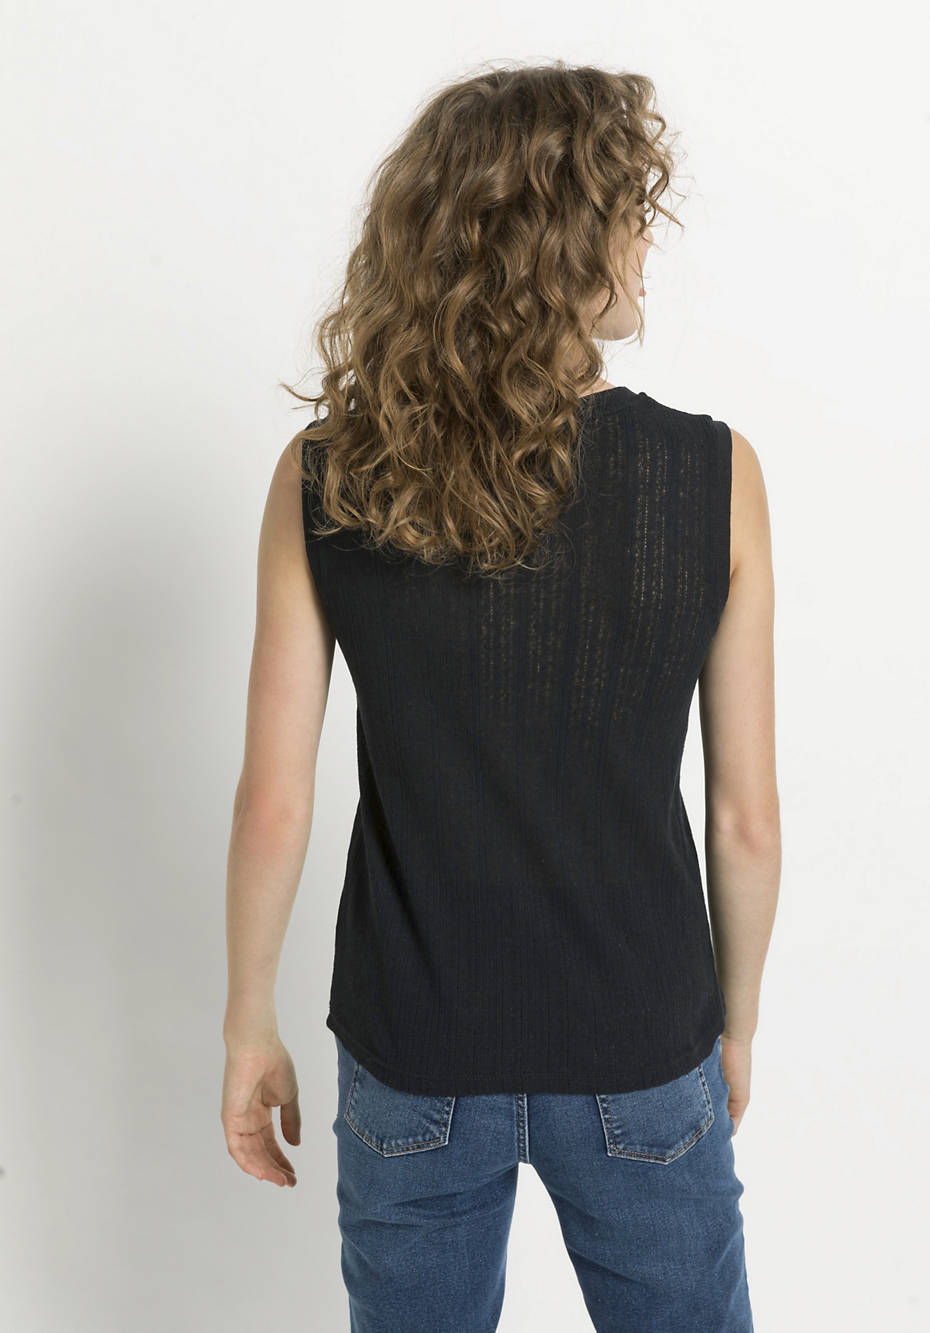 Ajour top made of organic cotton with linen